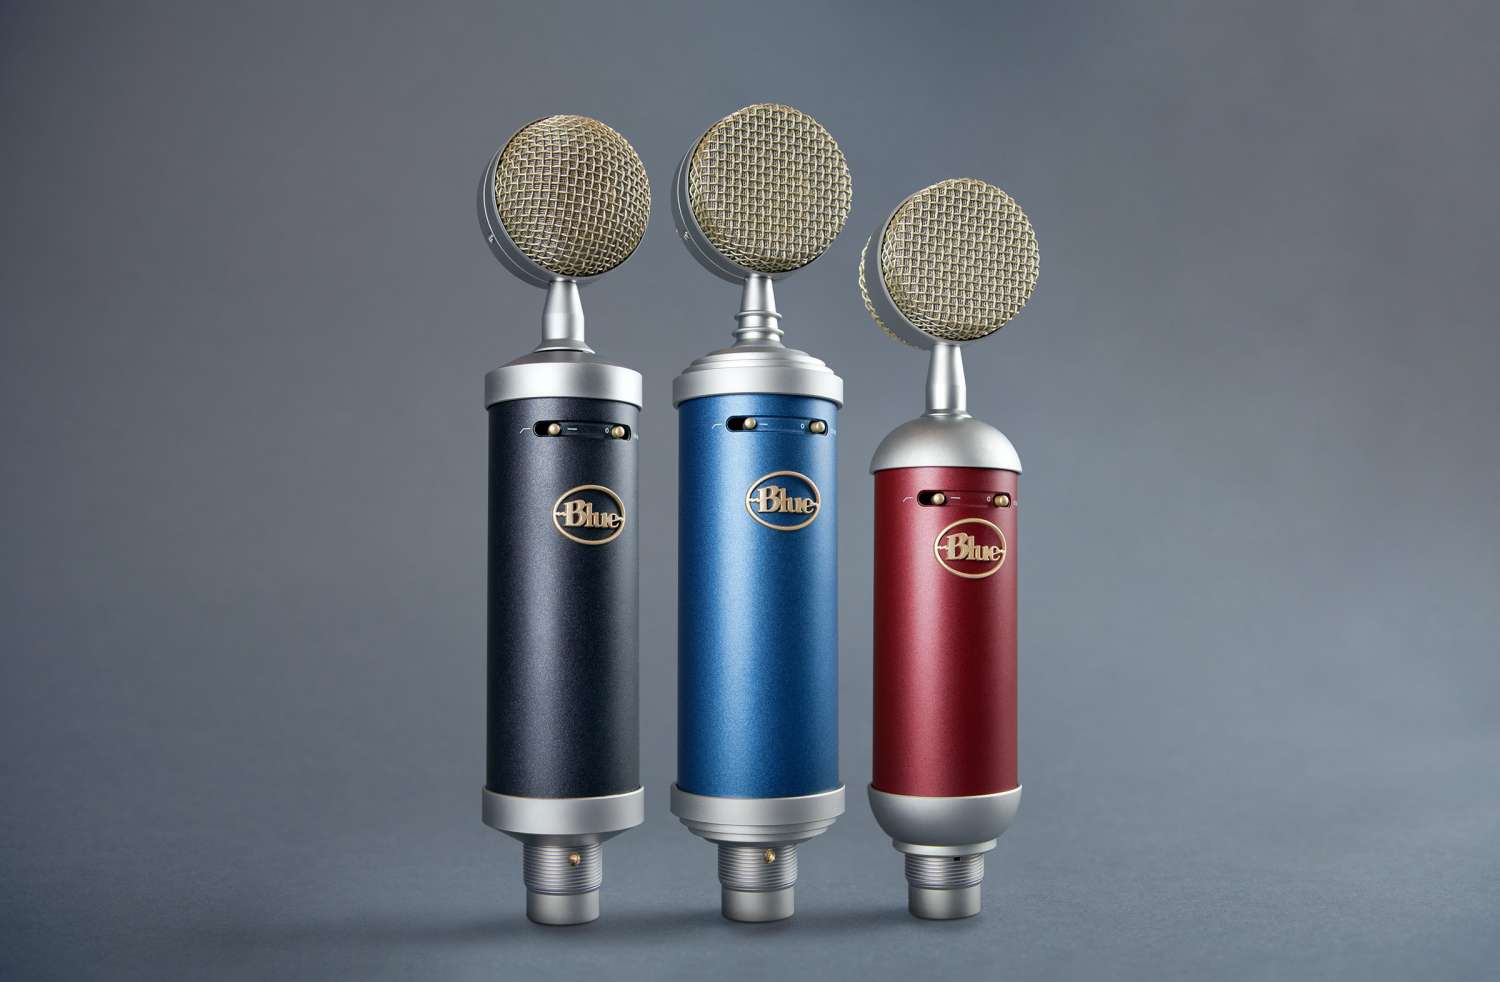 The enhanced Essentials Series provides the flexibility to track a wide variety of sound sources